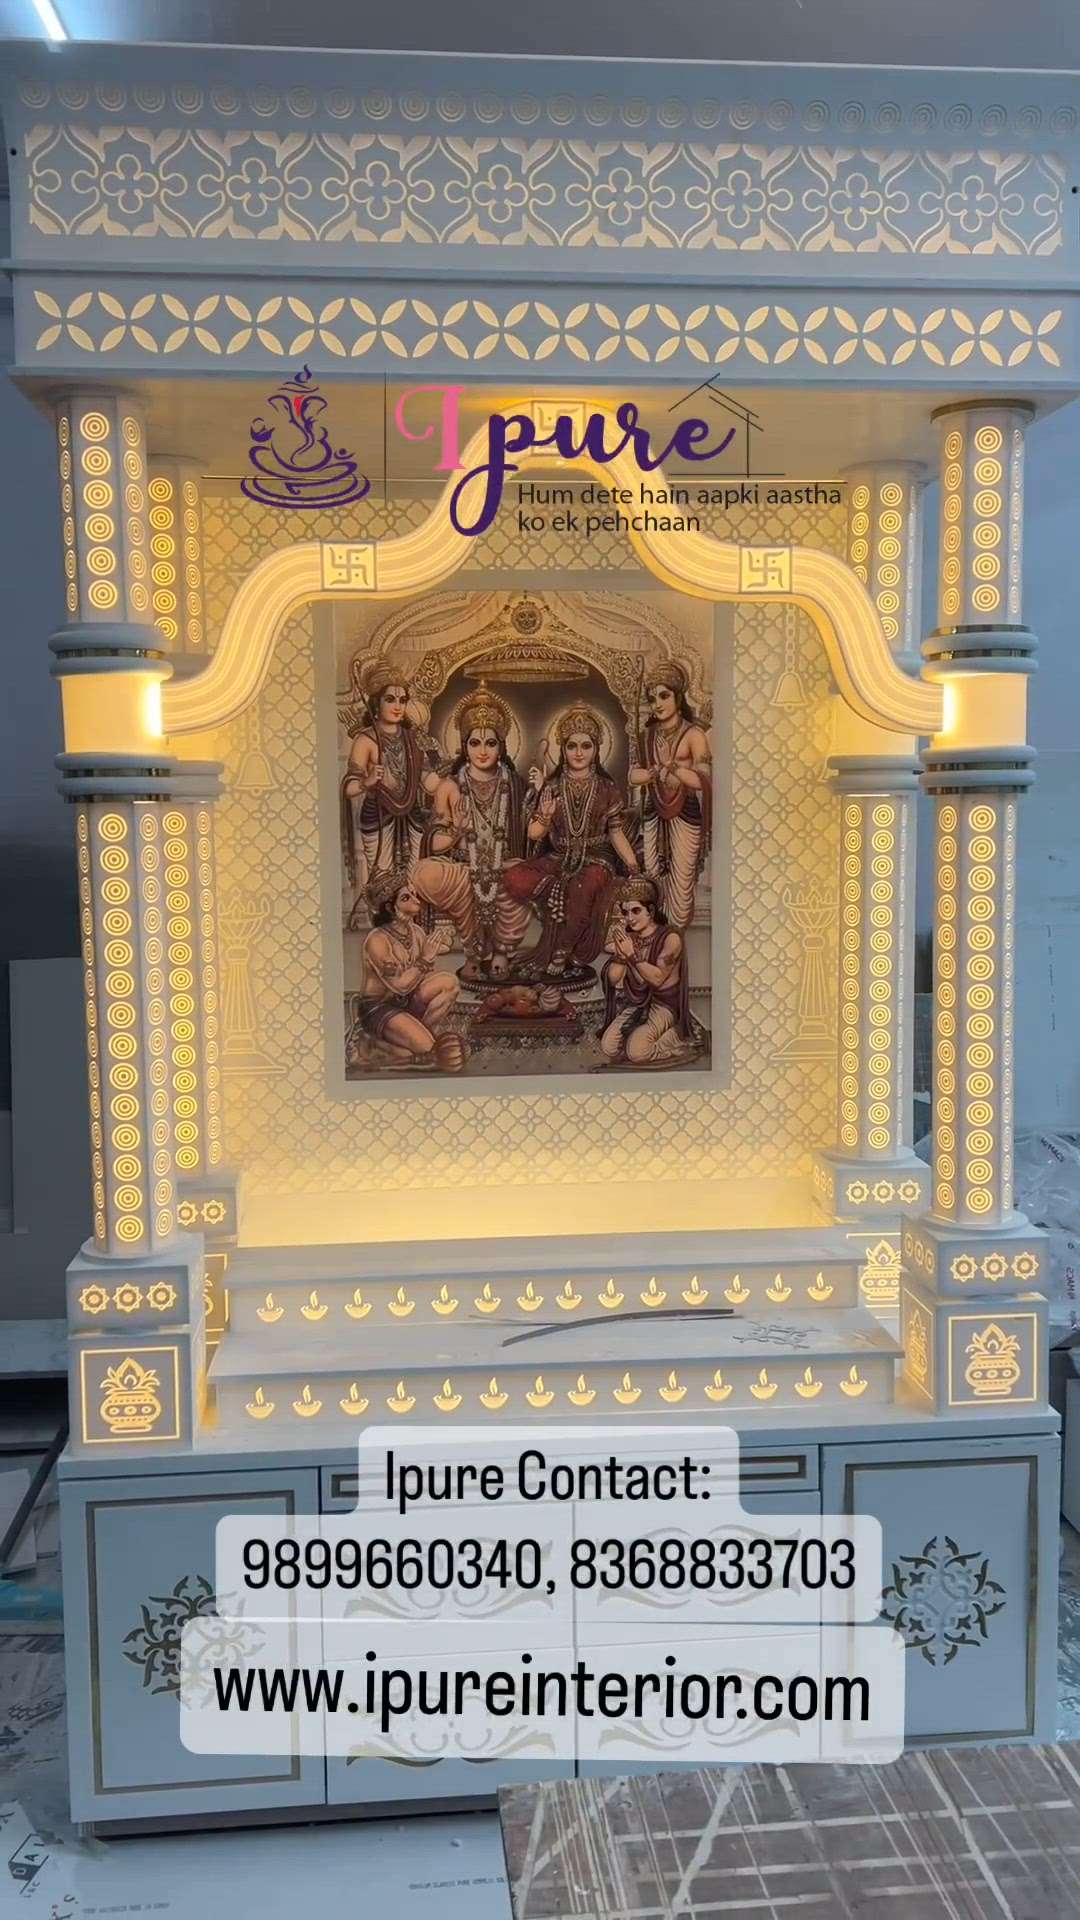 Corian Mandir / Corian Temple by Ipure Interior

We are the leading Manufacturer of Corian Mandir / Corian Temple or any type of Interior or Exterioe work.

For Price & other details please Contact Mr. Rajesh Biswas on CALL/WHATSAPP : 8368833703 or 9899660340.

We deliver All Over India & All Over World.

Please check website for address .

Thanks,
Ipure Team
www.ipureinterior.com
https://youtu.be/8tu2NoKYx6w
 
#corian #corianmandir #coriantemple #coriandesign #mandir #mandirdesign #InteriorDesigner #manufacturer #luxurydecor #Architect #architectdesign #Architectural&Interior #LUXURY_INTERIOR #Poojaroom #poojaroomdesign #poojaunit #poojaroomdecor #poojamandir  #poojaroominterior  #poojaroomconcepts #pooja #temple